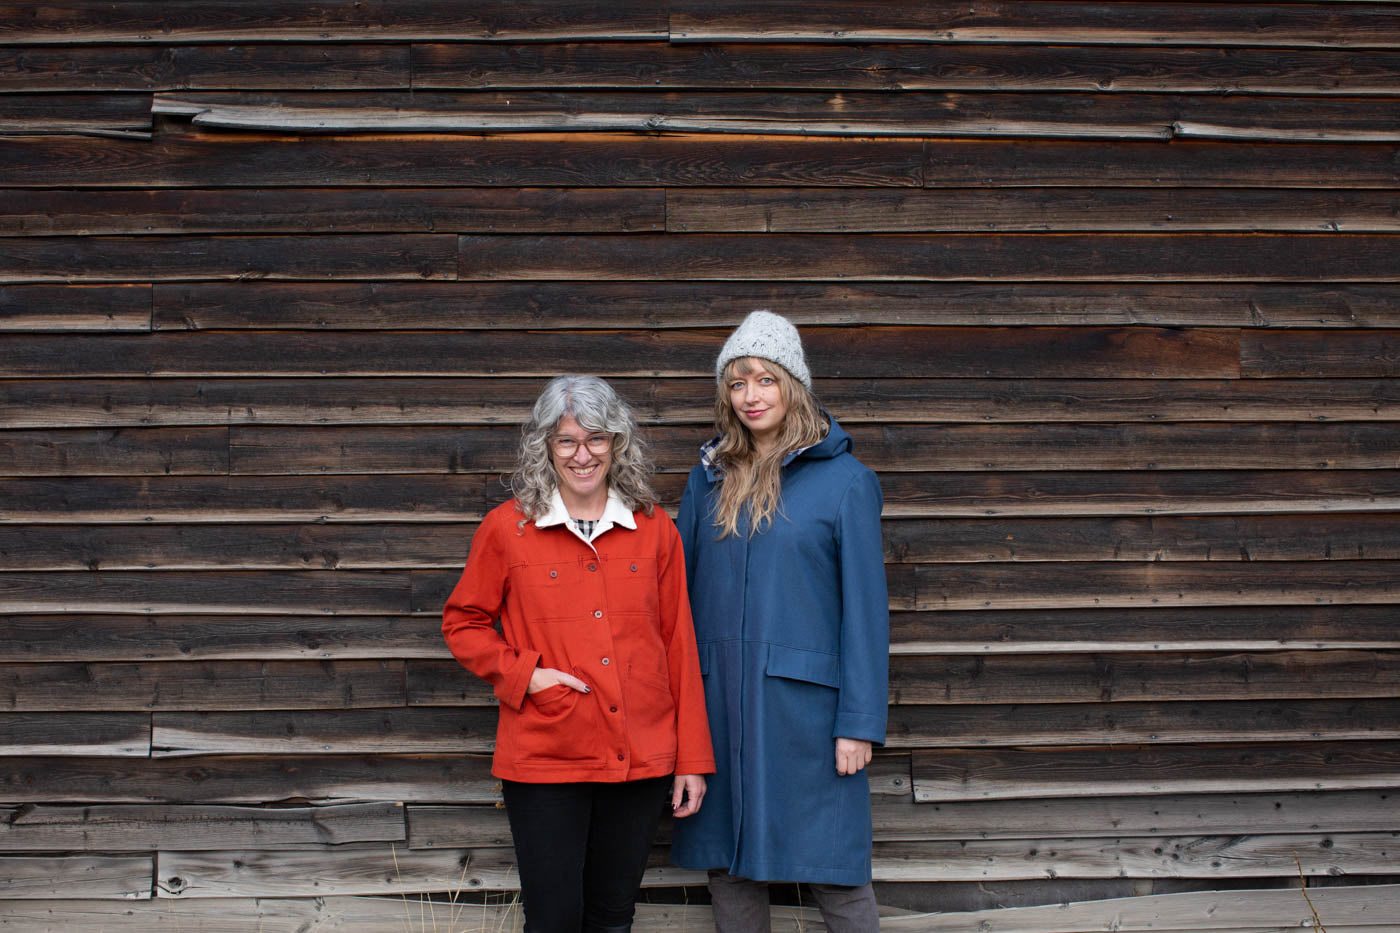 Amber and Jaime stand together outside against a weathered barnwood wall. Jaime wears her vibrant red Thayer Jacket with cream fleece lining showing at the collar. Amber wears her blue wool Hoodie Parka with a hand knit grey hat.